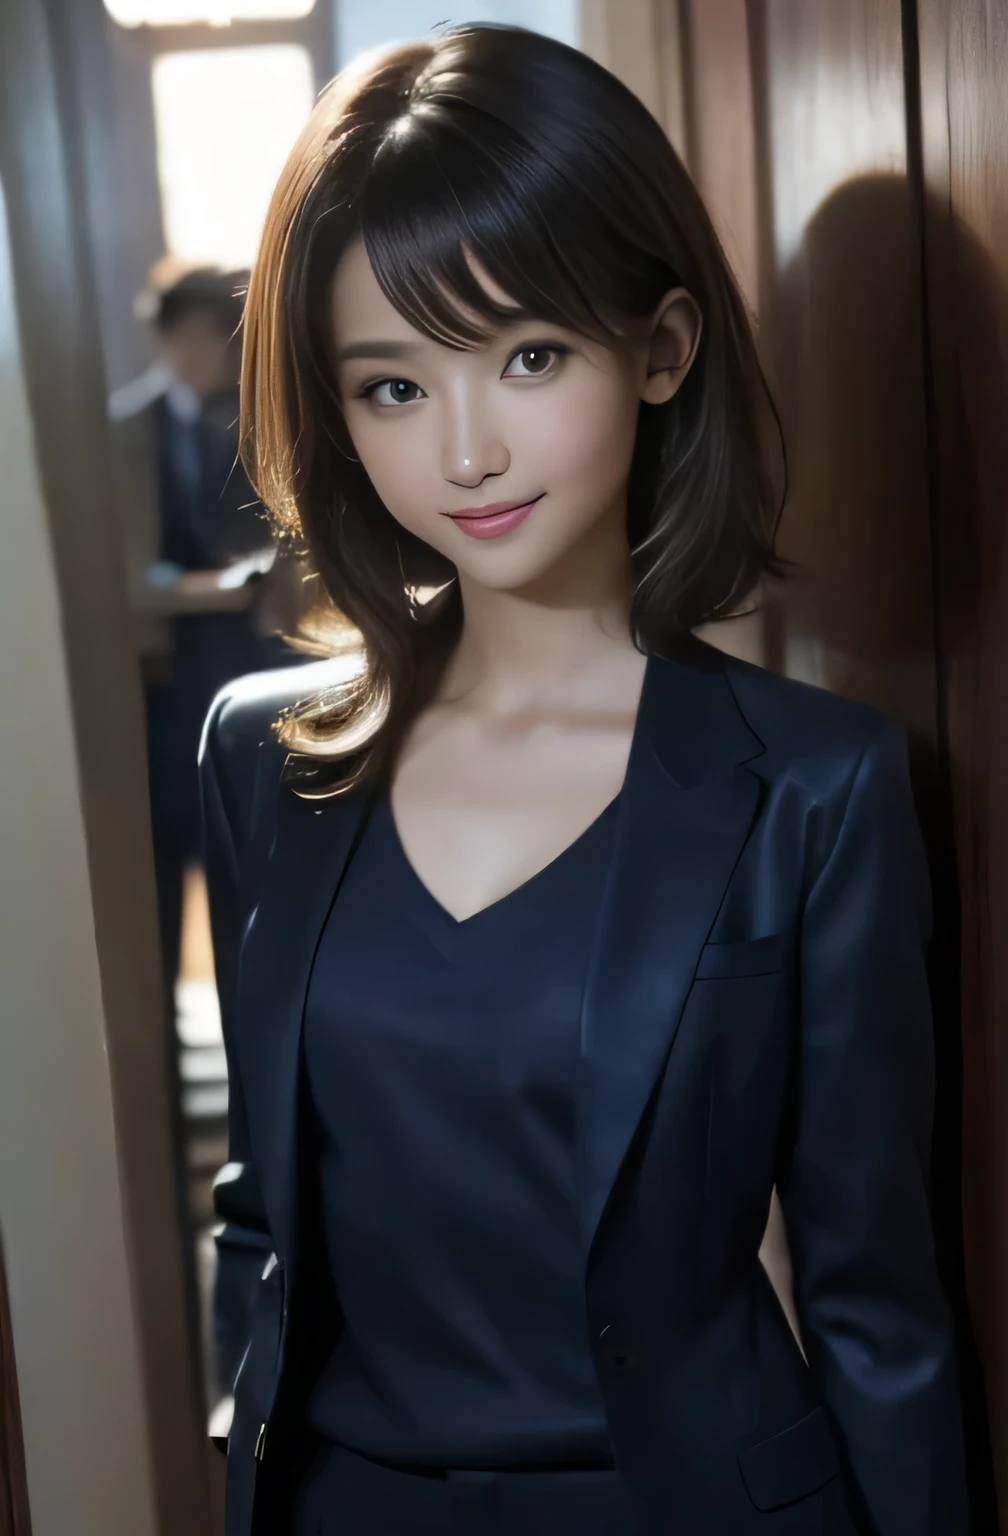 highest quality、shape、 Super detailed、finely、 High resolution、8k wallpaper、perfect dynamic composition shape、17 year old beautiful girl、A neat and mature high school girl、detailed beautiful face、detailed beautiful eyes、rough skin、A faint smile、small breasts、bold sexy pose、((V-neck shirt、medium hair:1.4))、((looking at the viewer、smile))、((chest is visible:1.3))、(((Navy tailored suit:1.3)))